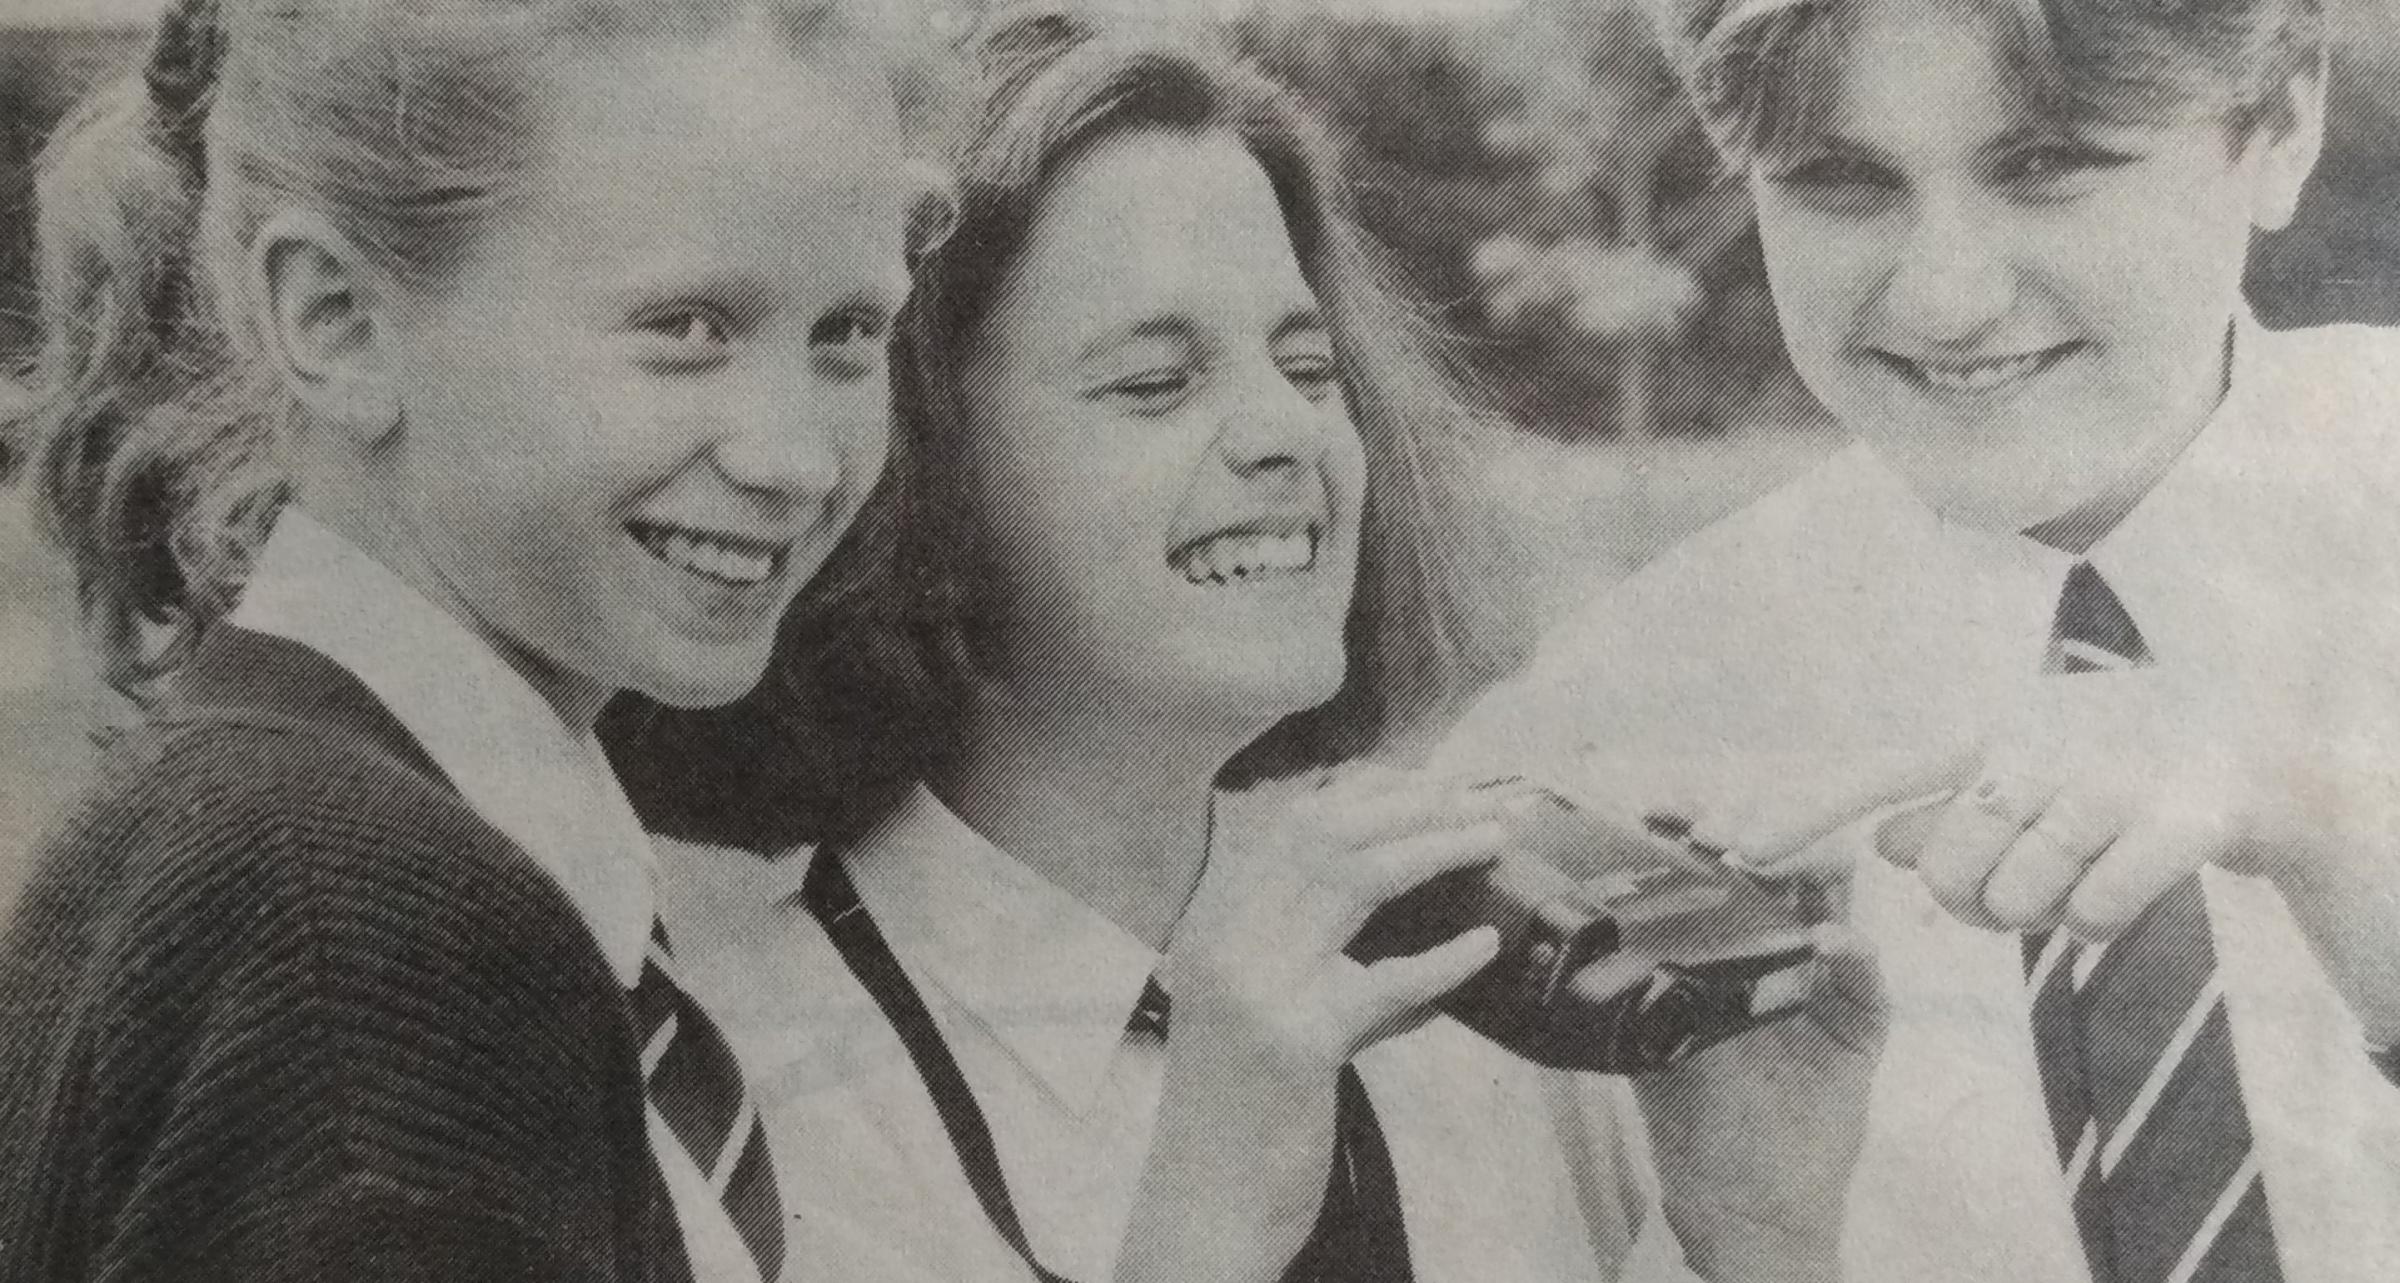 June 1992 and Nunnery Wood pupils won a schools photographic competition, with a state-of-the-art Canon still video camera the prize. Pictured are pupils Lucy, Natalie and Becky, whose work formed part of the schools entry